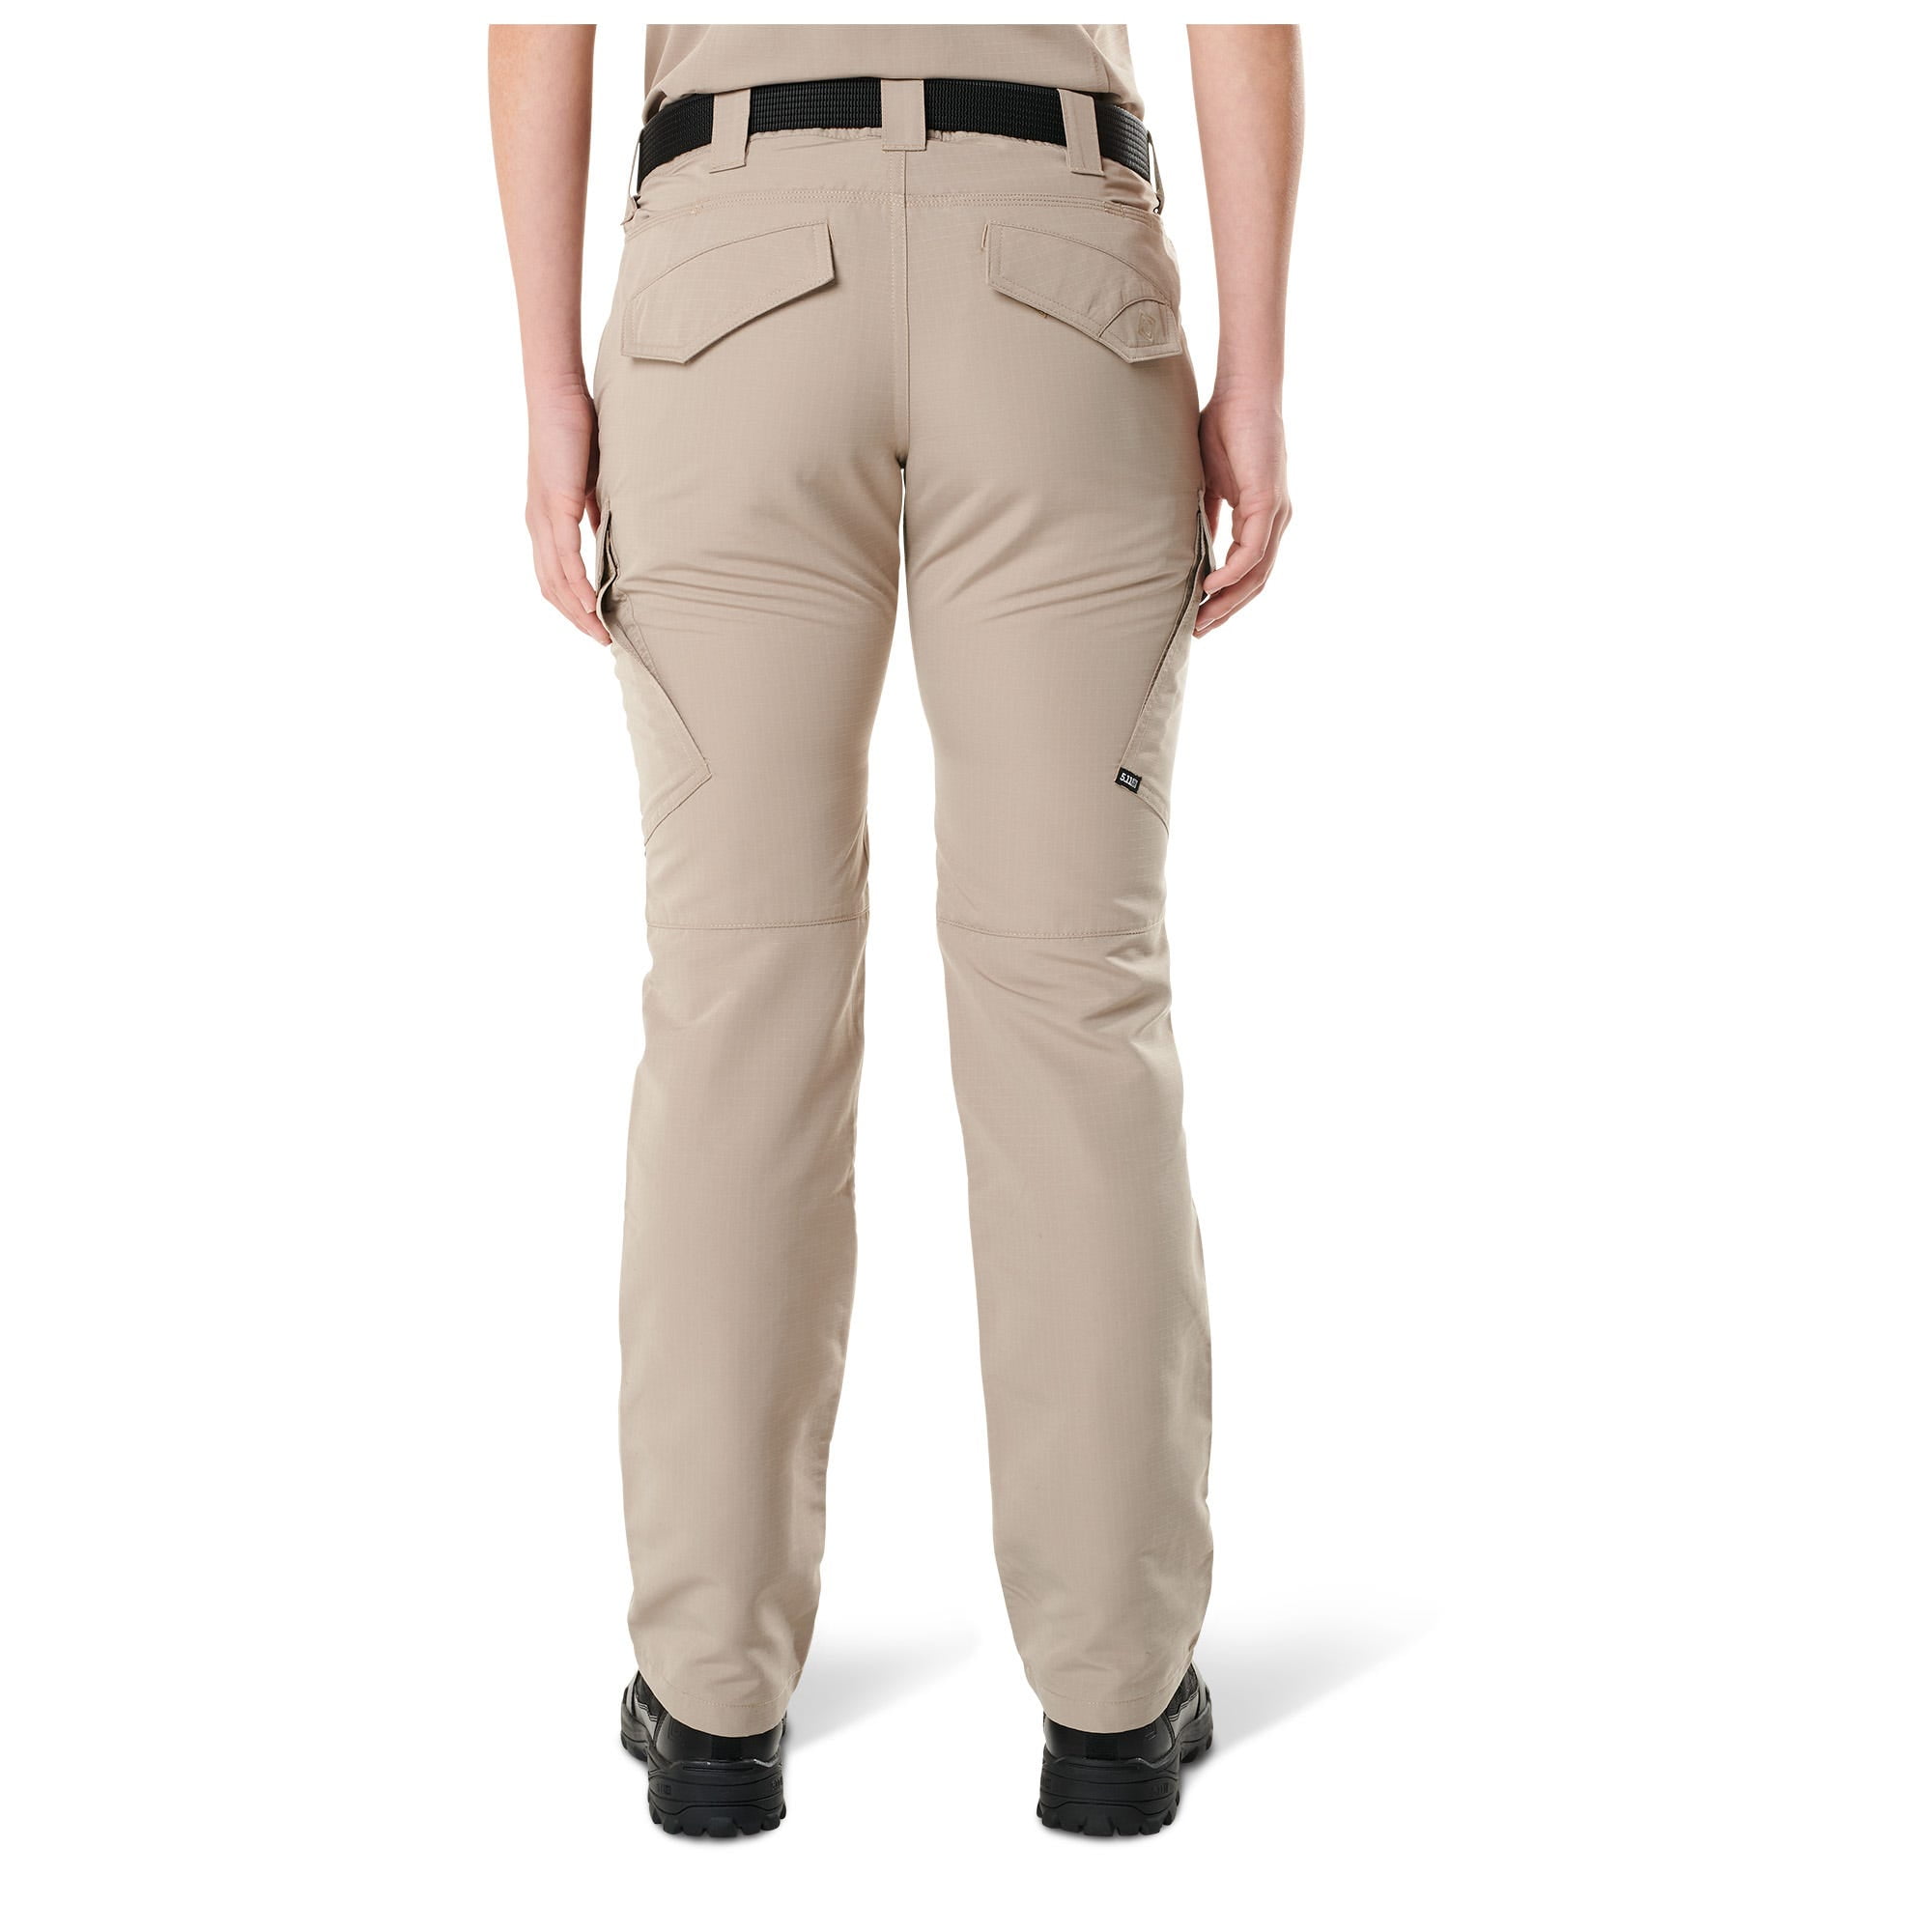 5.11 Tactical Womens Fast-Tac Cargo Pockets Professional Uniform Pants Polyester Ripstop Style 64419 